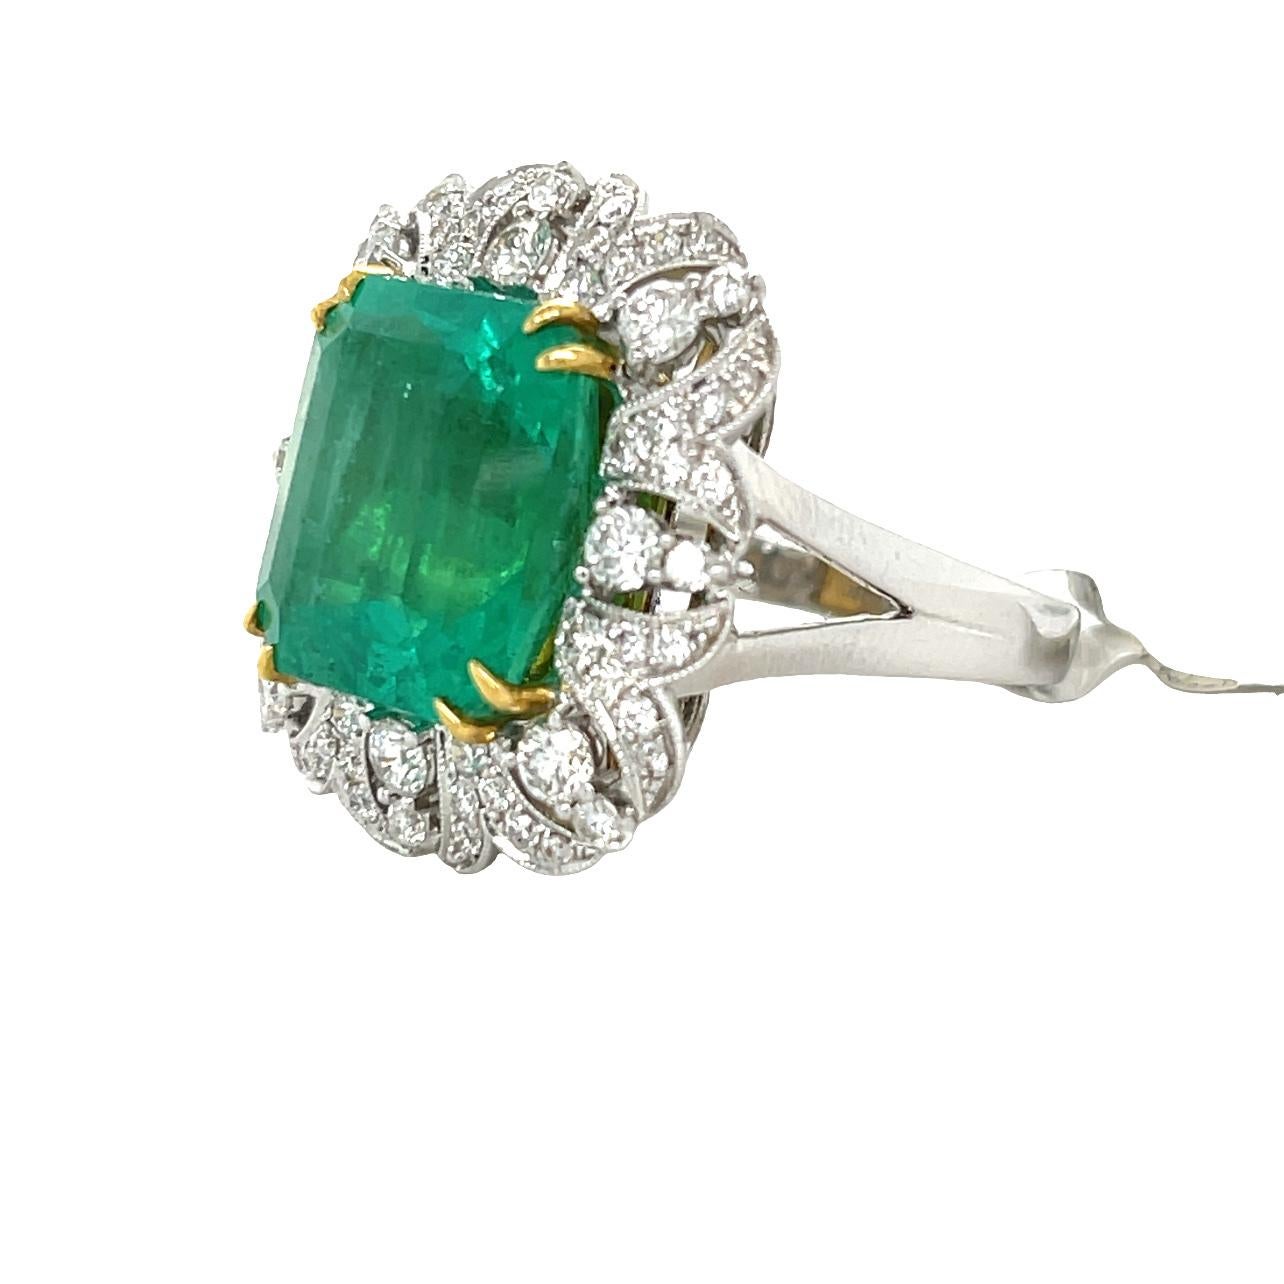 This stunning Statement ring has a 12.5x13mm emerald cut Zambian Emerald with 8 prong setting in 18 karat white and yellow gold. There are top quality sparkling brilliant cut diamonds surrounding the center piece for added elegance. This beautiful